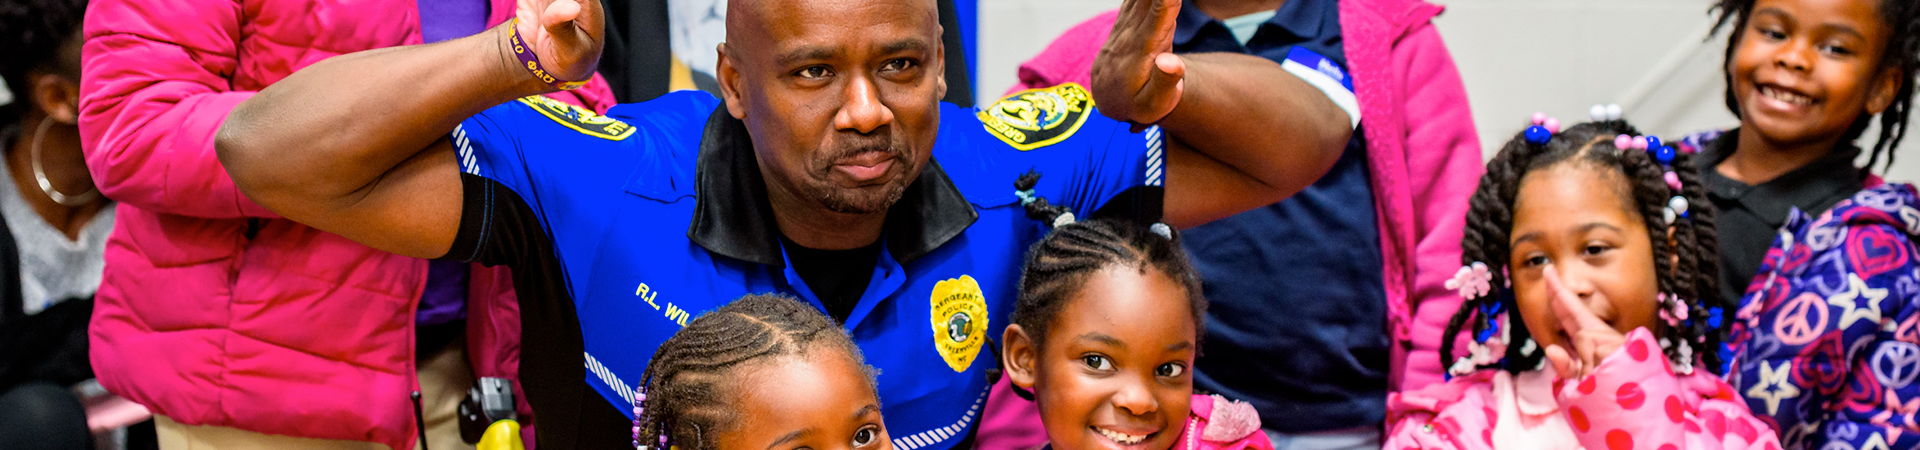 Police officer with kids